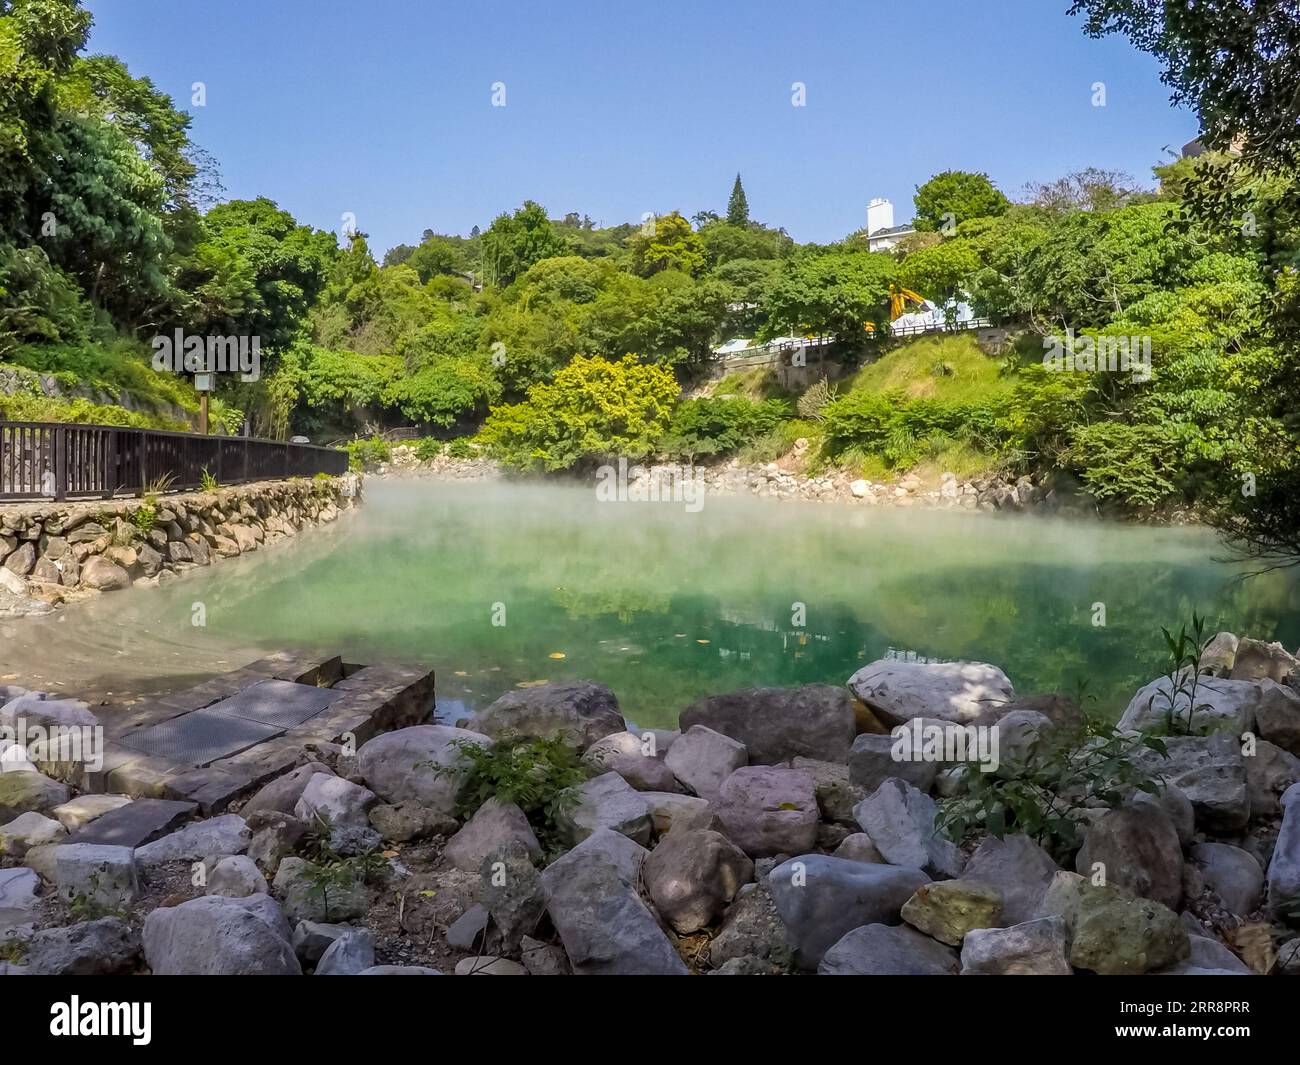 Beitou Thermal Valley, very well known famous Taiwan’s natural hot spring located in Beitou district, Taipei, Taiwan Stock Photo